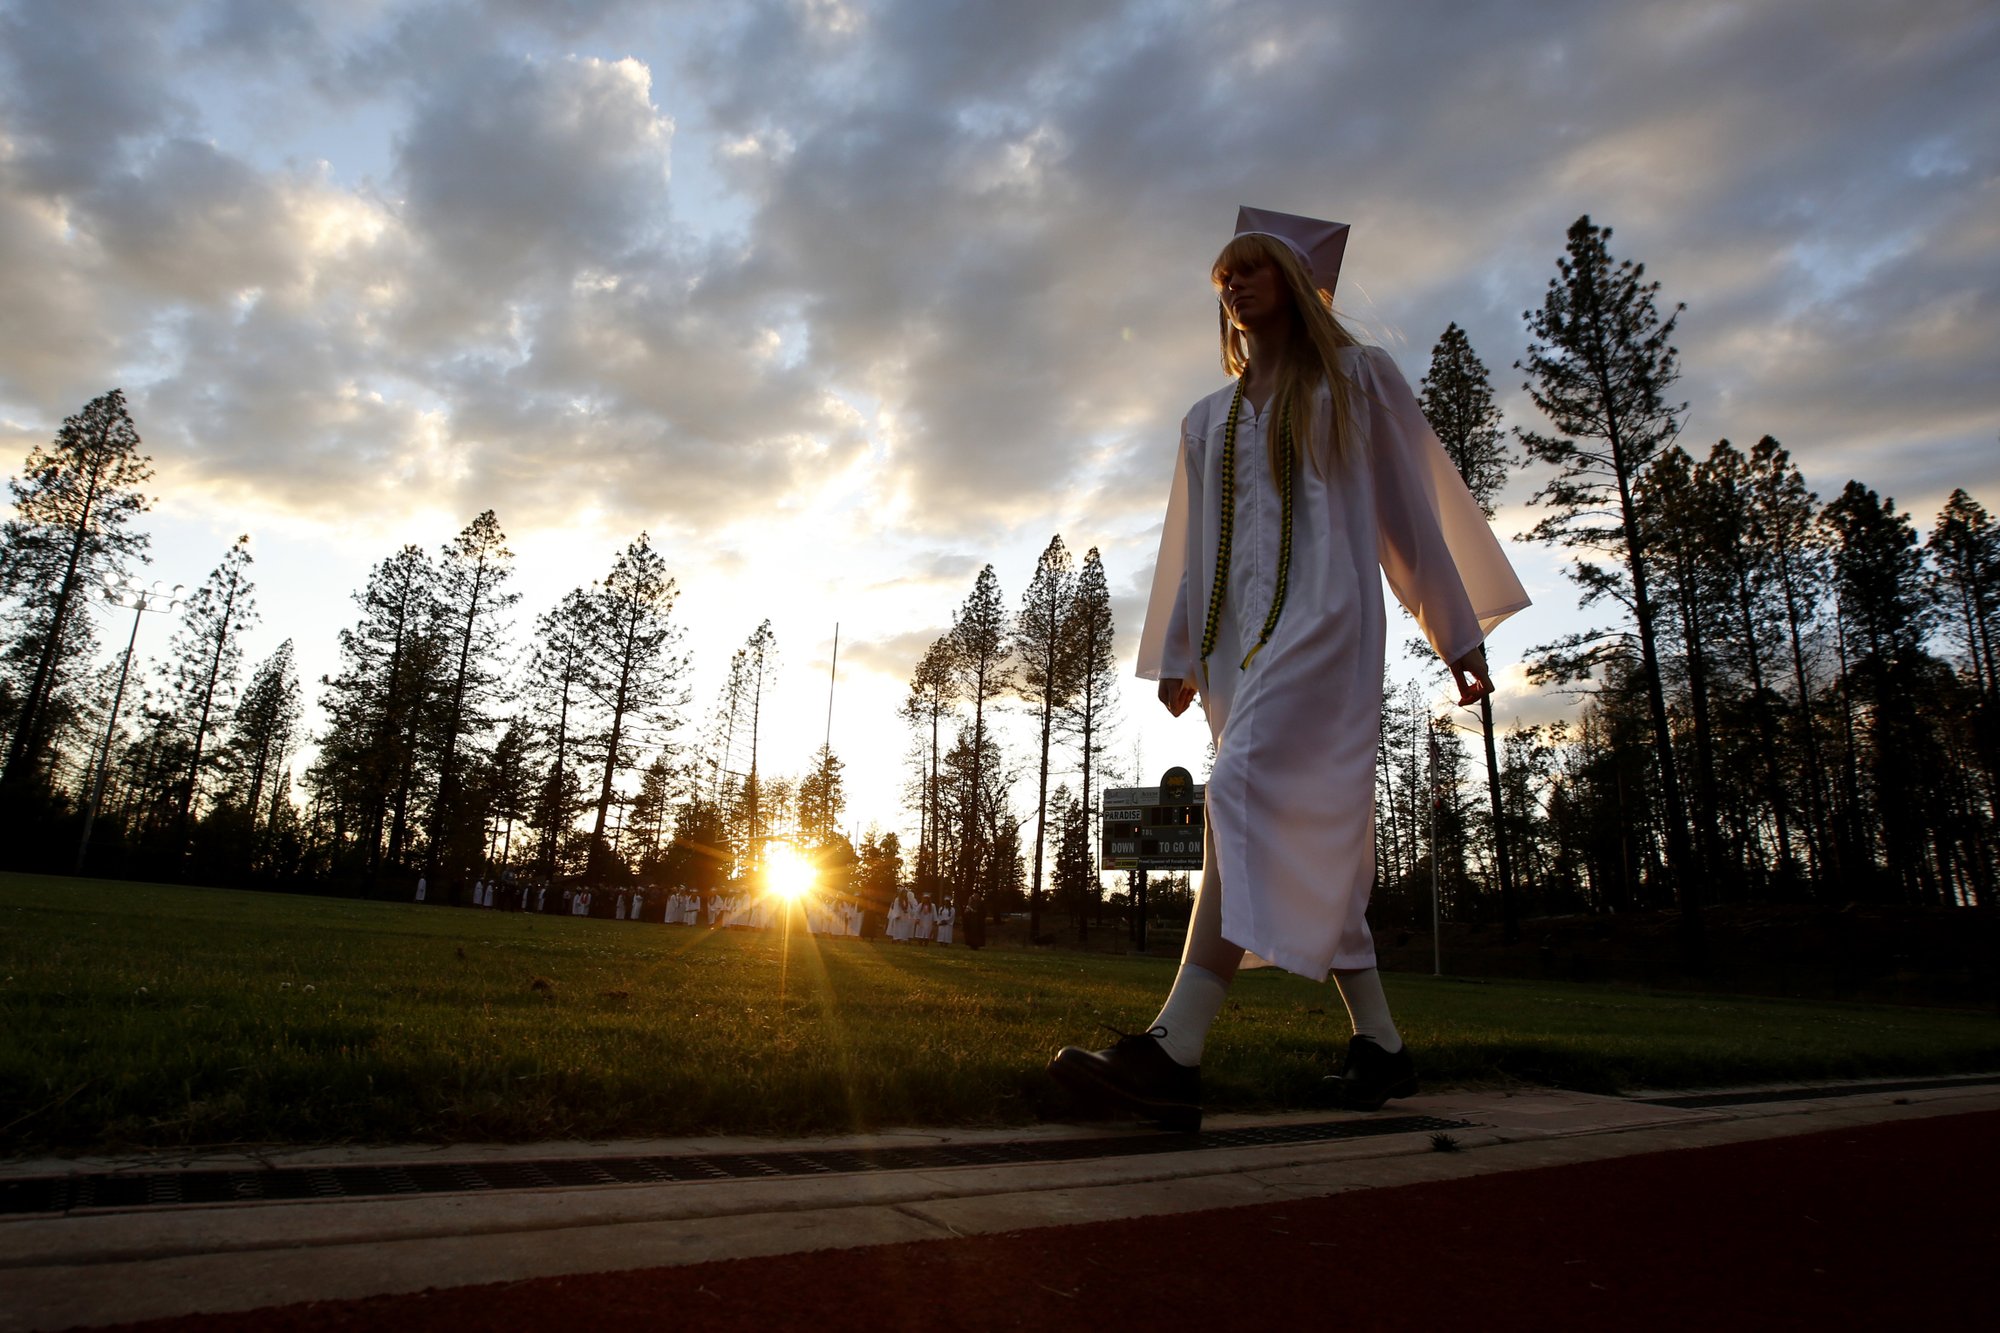 Teens graduating in California town nearly destroyed by fire